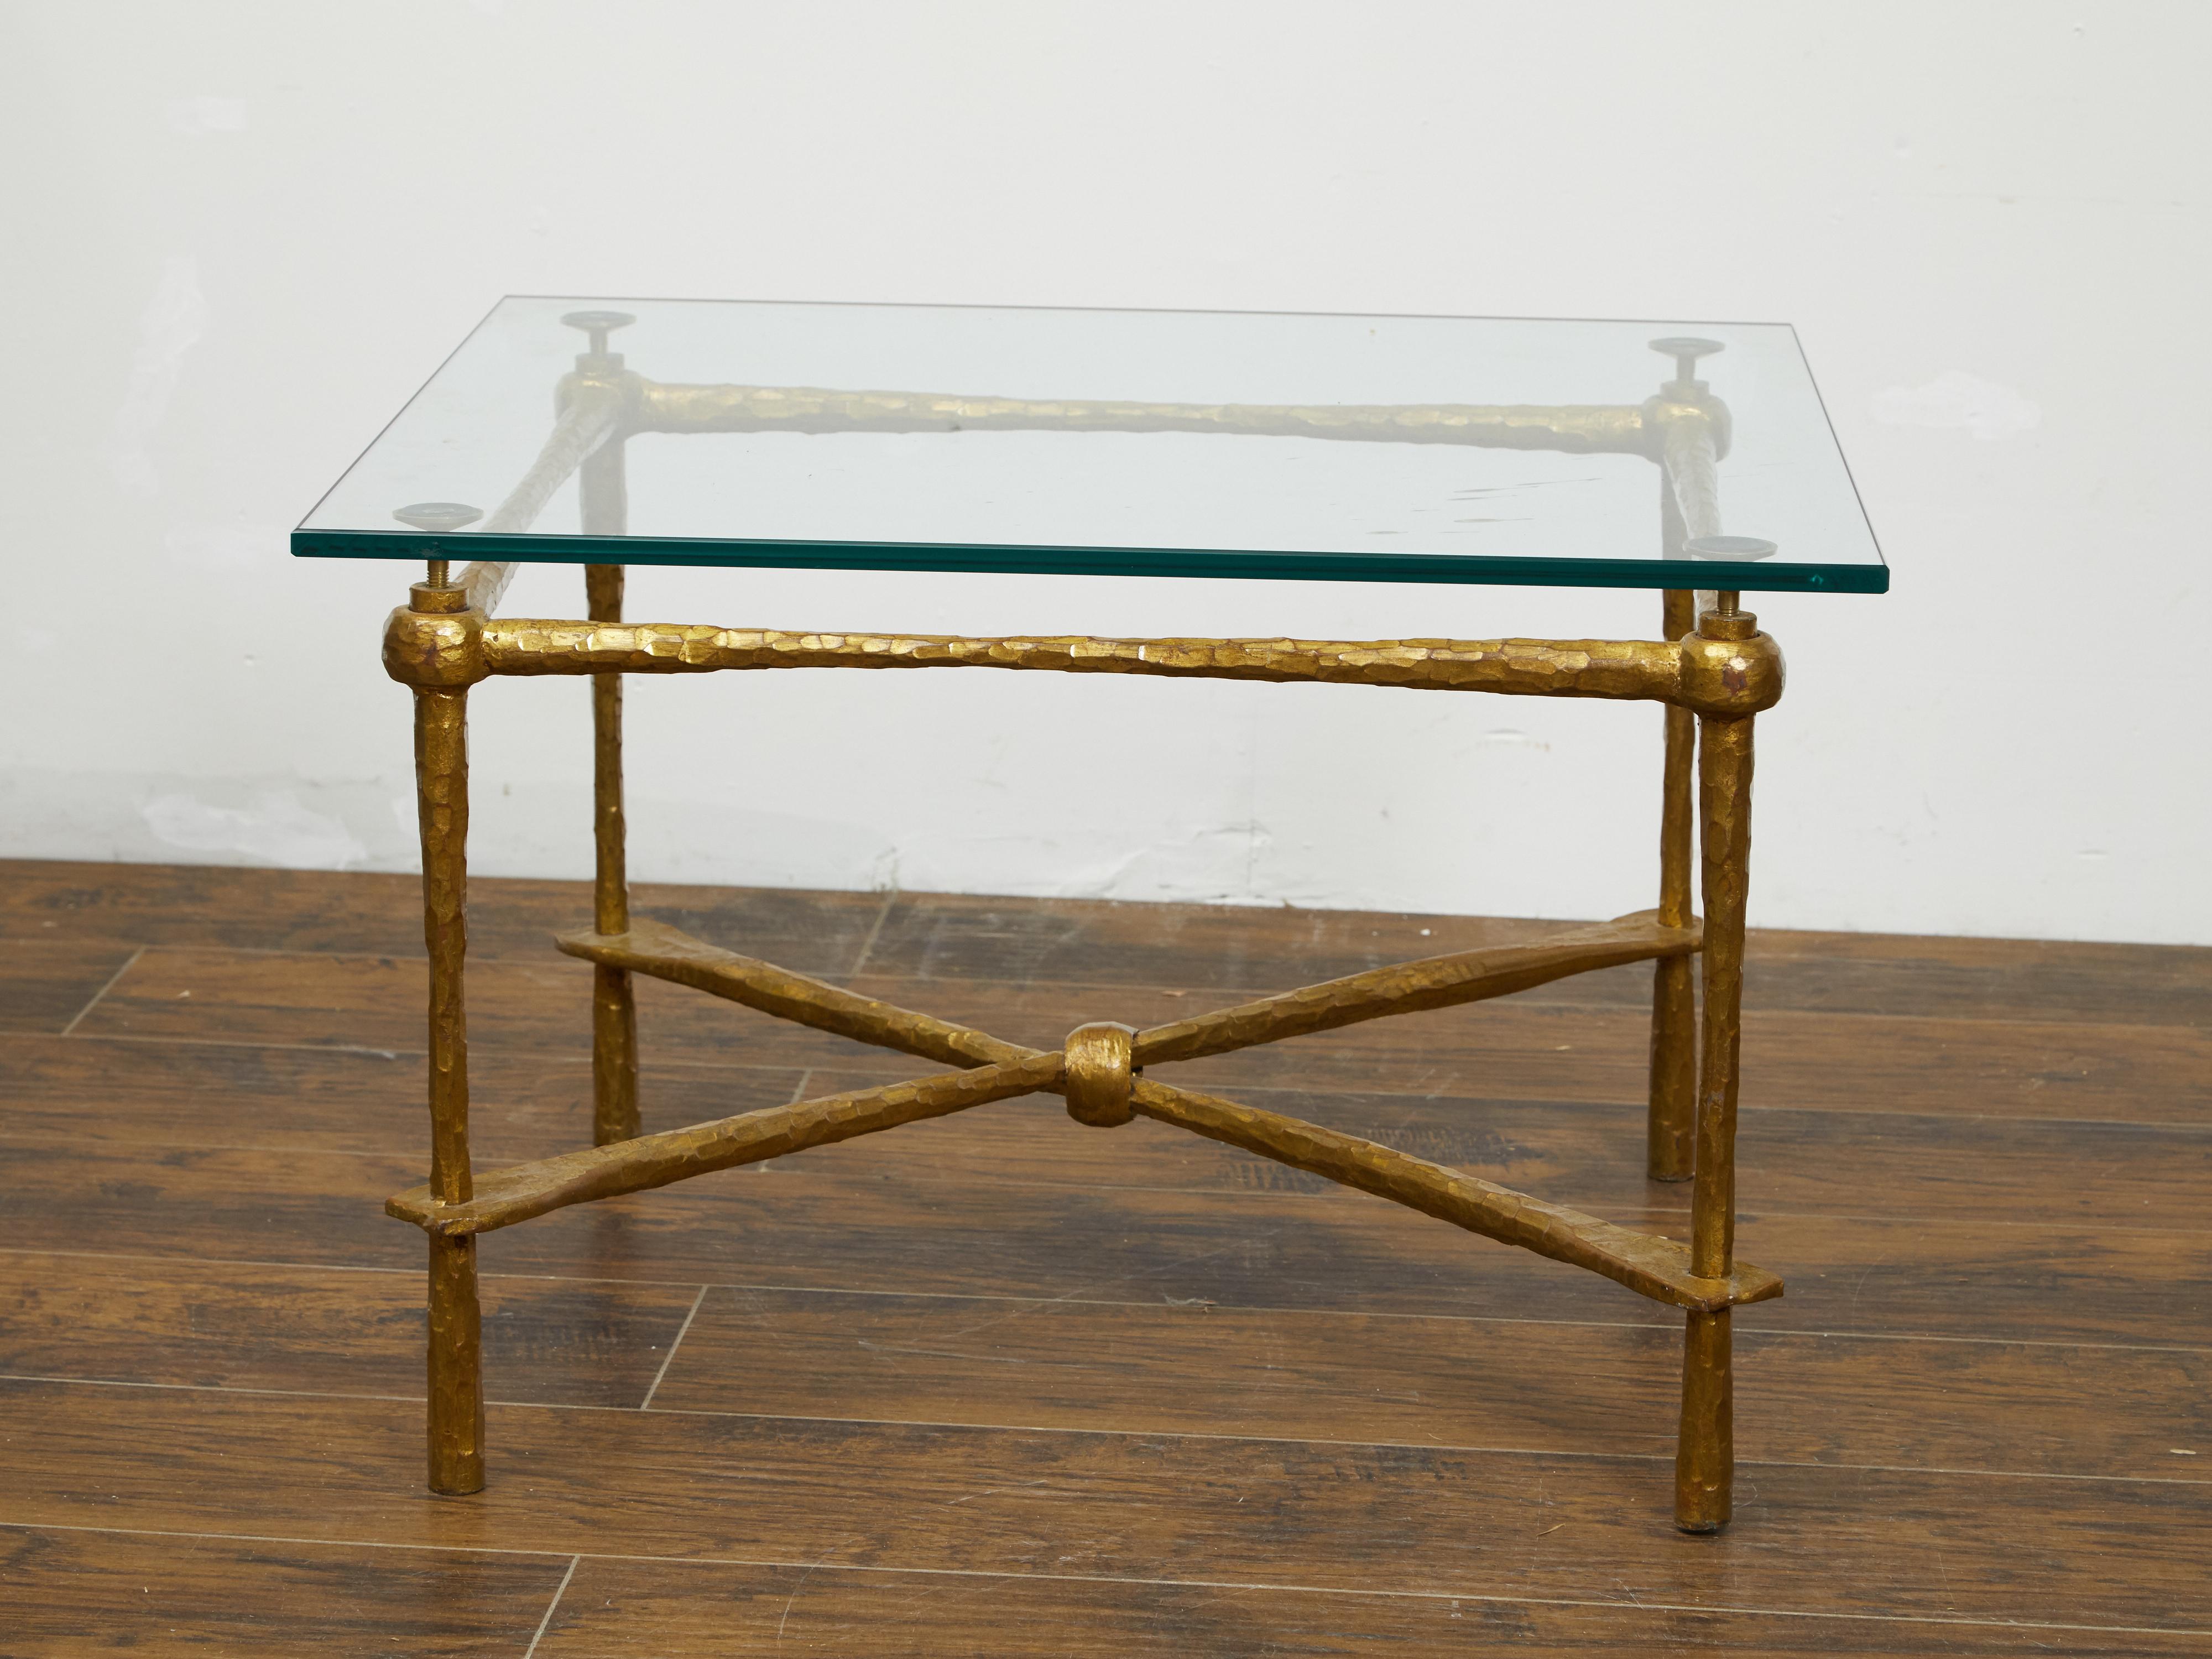 Italian Midcentury Gilt Metal Coffee Table with Glass Top and Hammered Accents For Sale 3